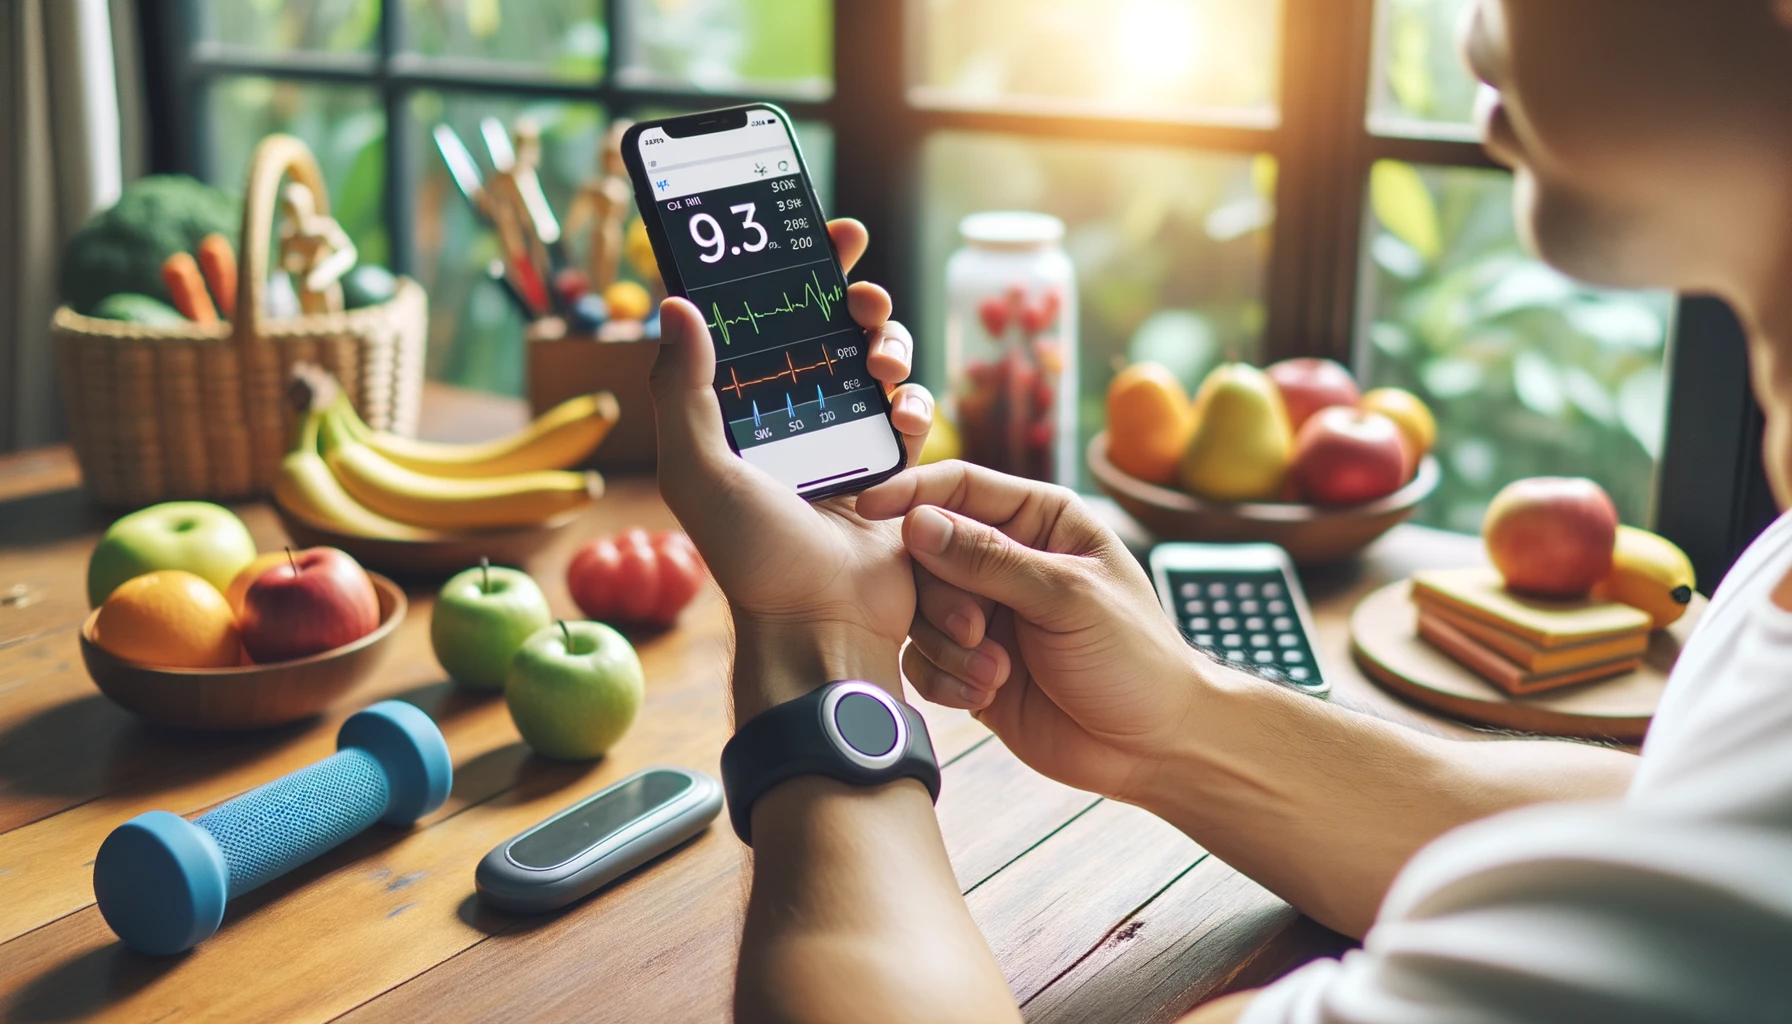 An individual using a Continuous Glucose Monitoring (CGM) device on their arm, checking the readings on a smartphone. In the background, a setting representing a healthy lifestyle with fruits, vegetables, and exercise equipment